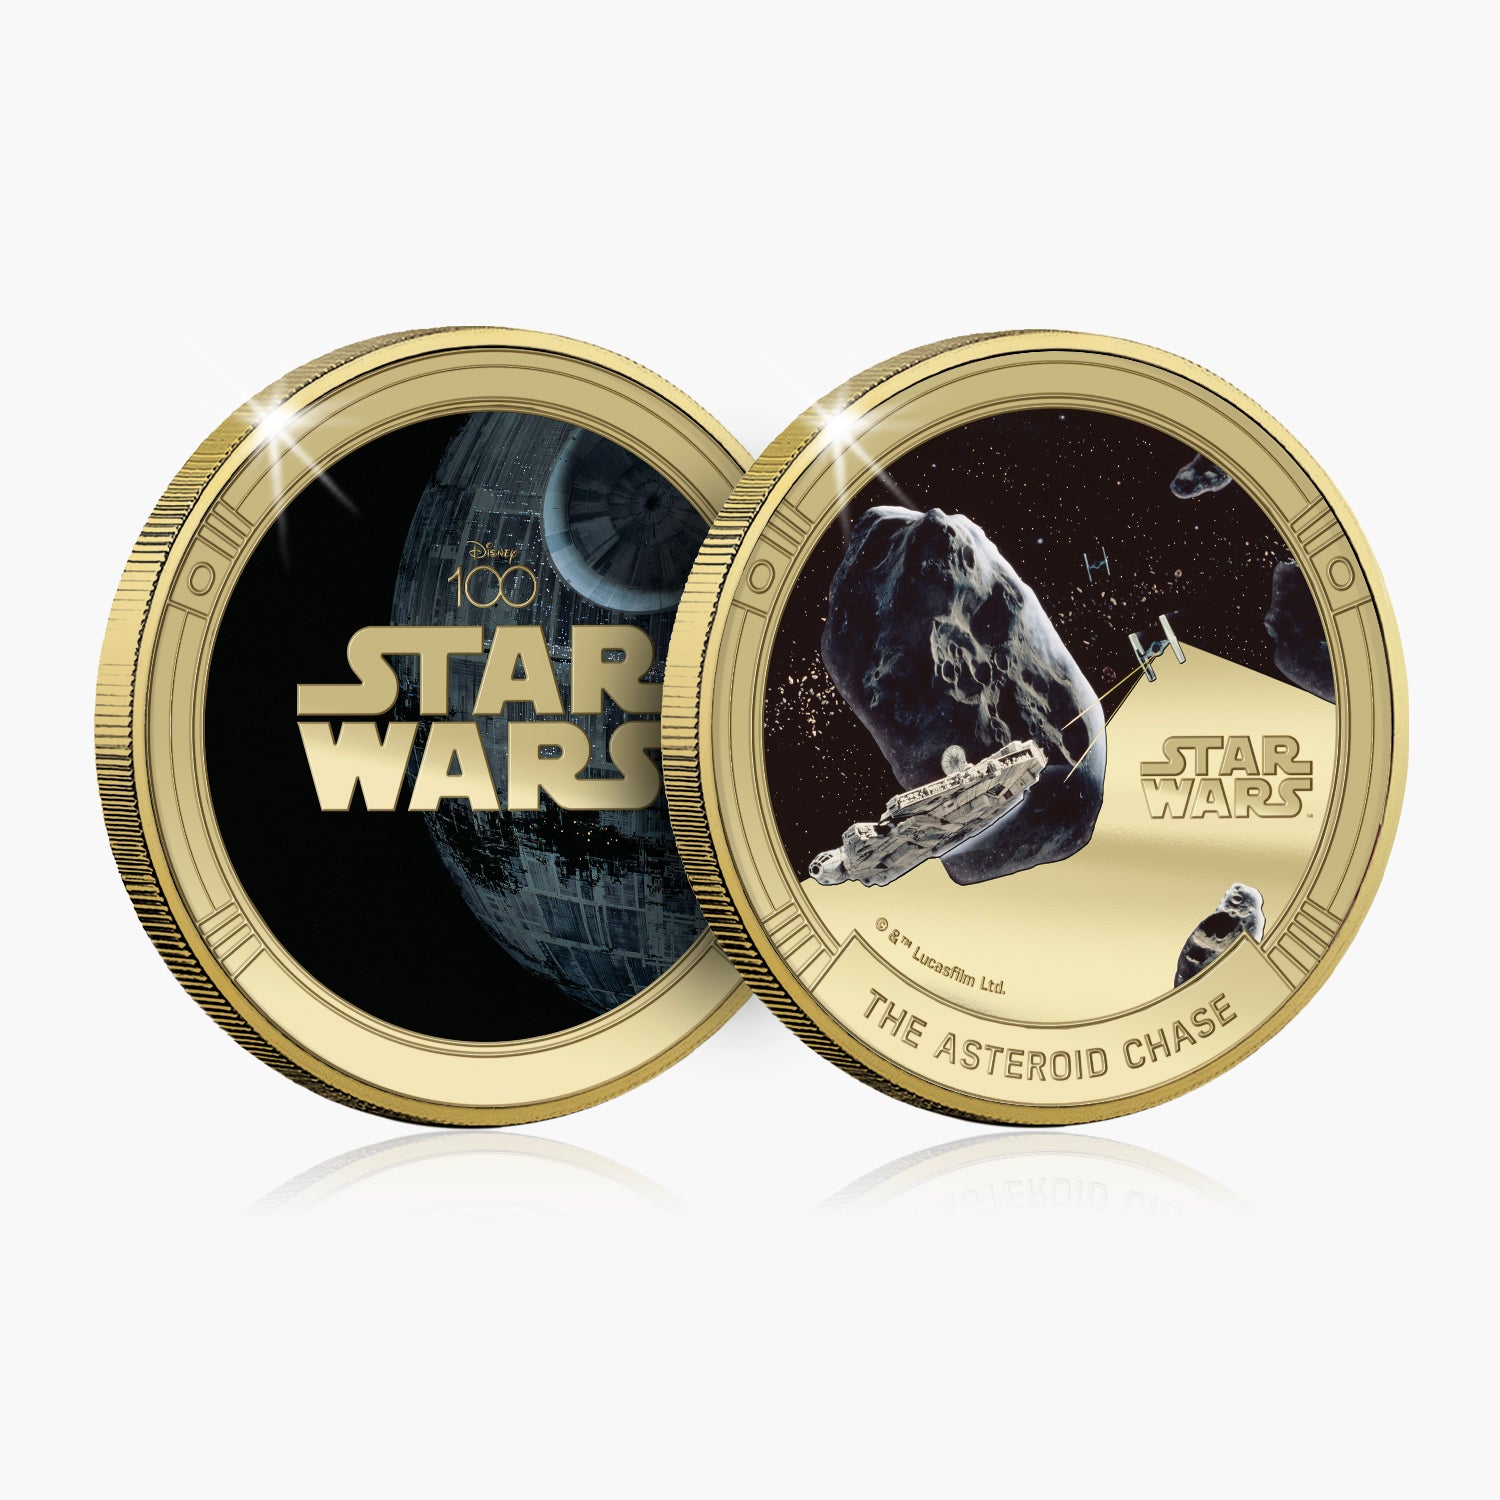 D100 Star Wars The Asteroid Chase Gold Plated Commemorative